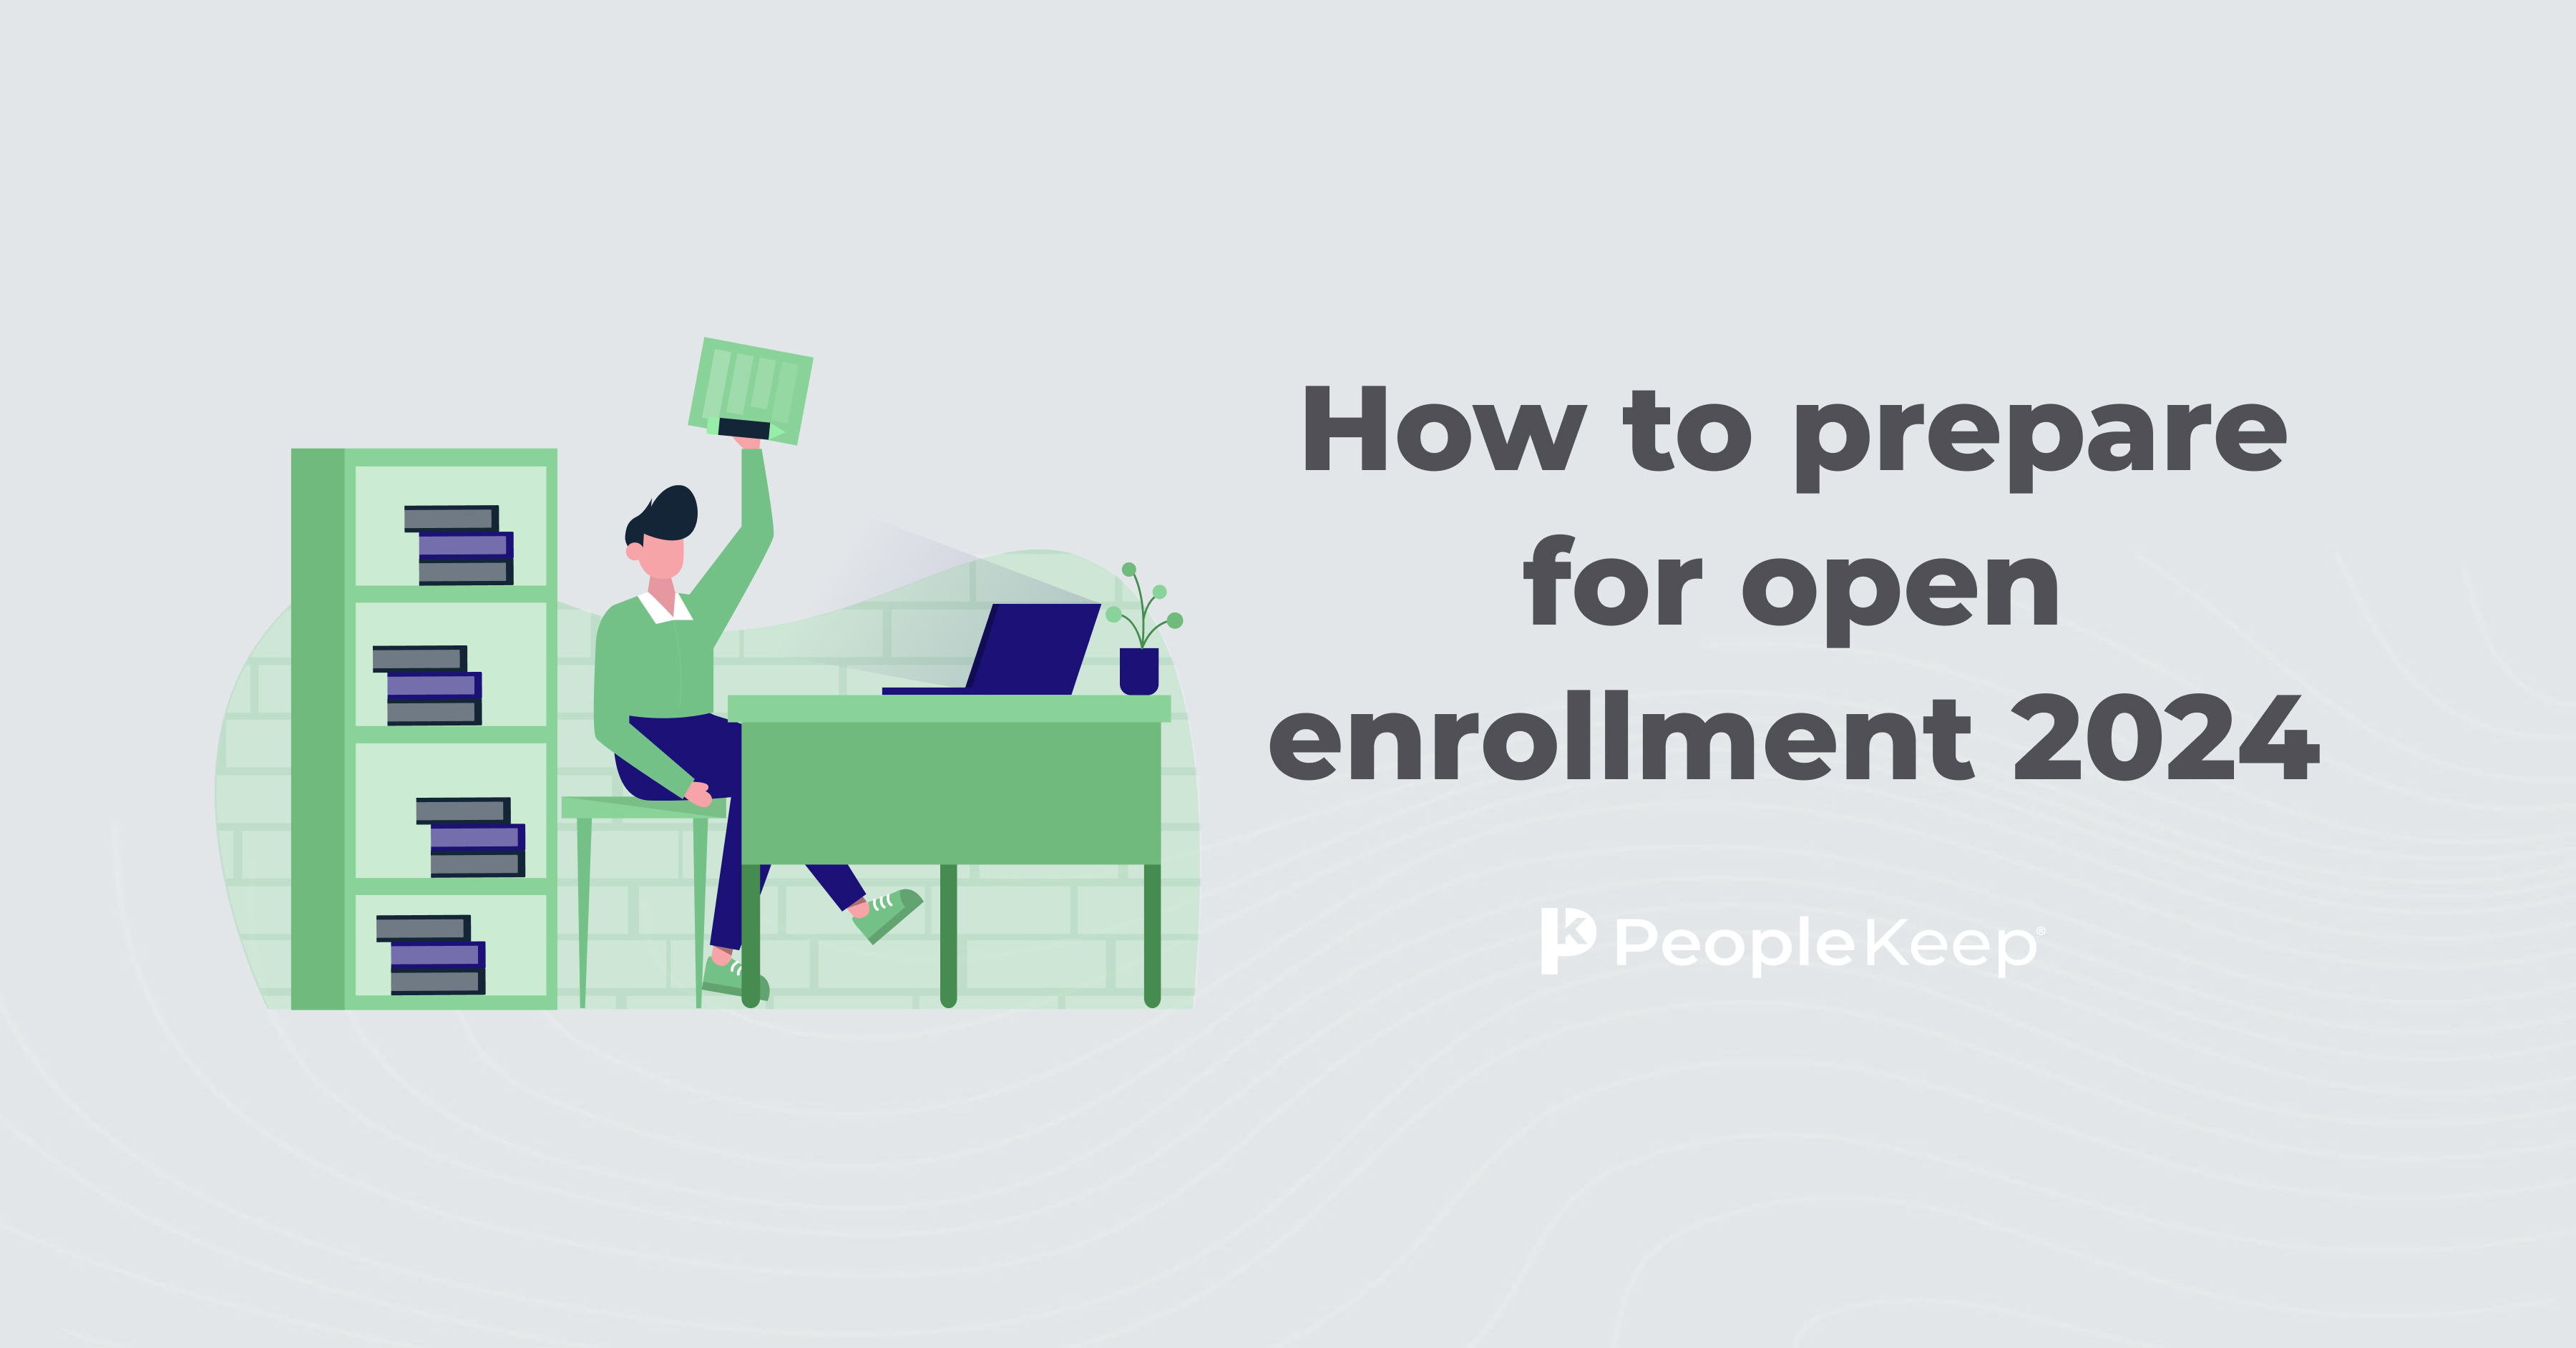 How to prepare for open enrollment 2024